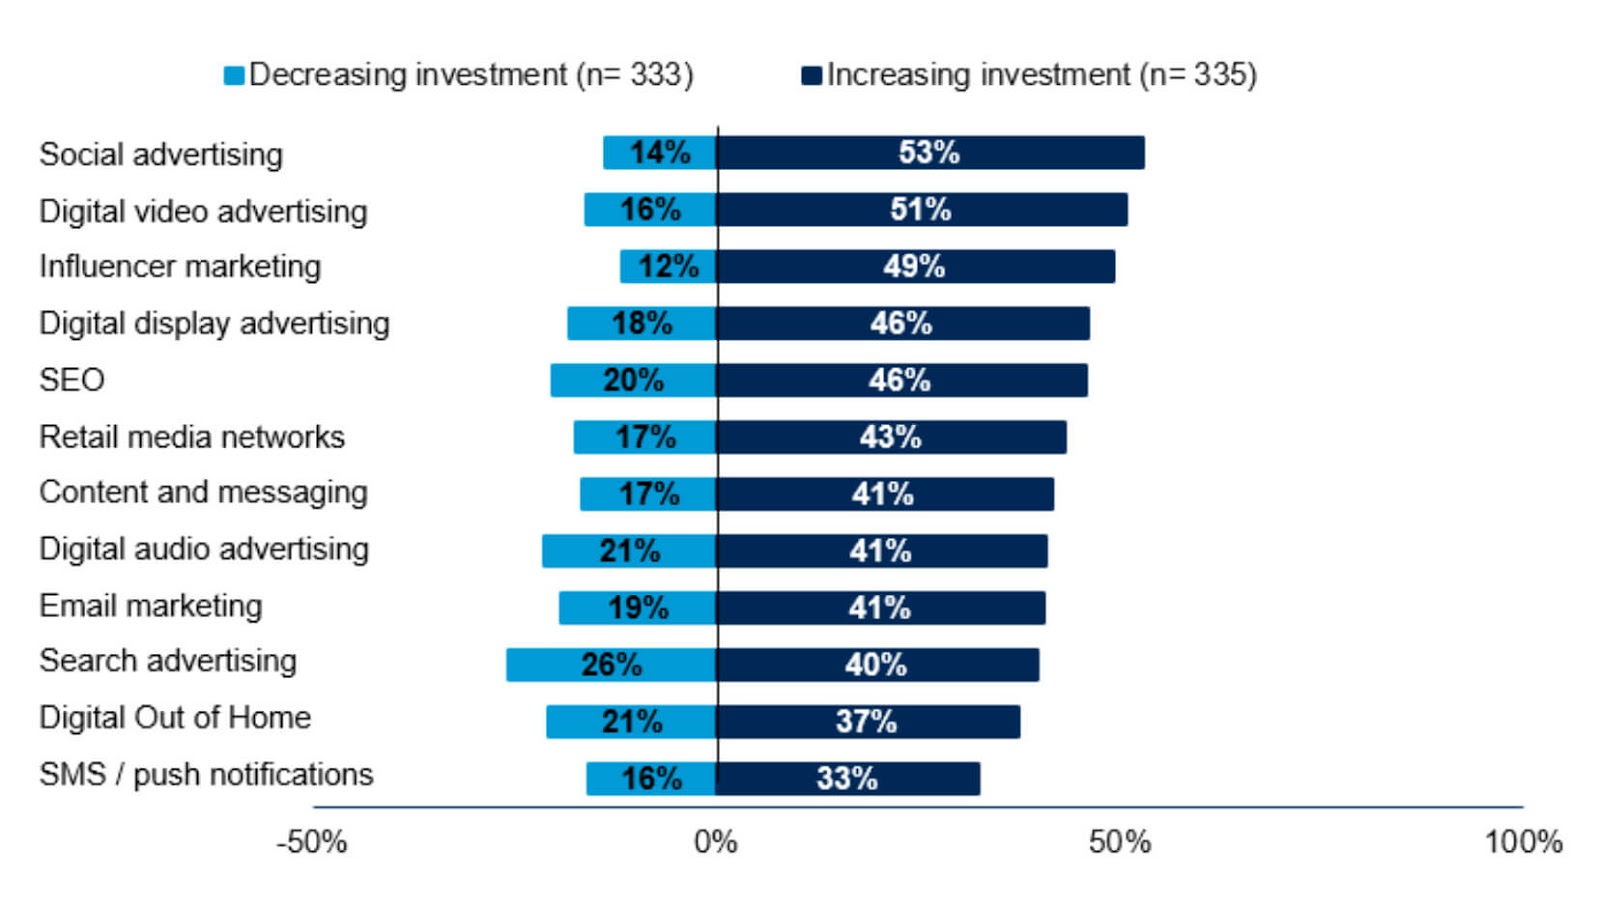 Change in Investments for Digital Channels in 2023 (Percentage of Respondents)